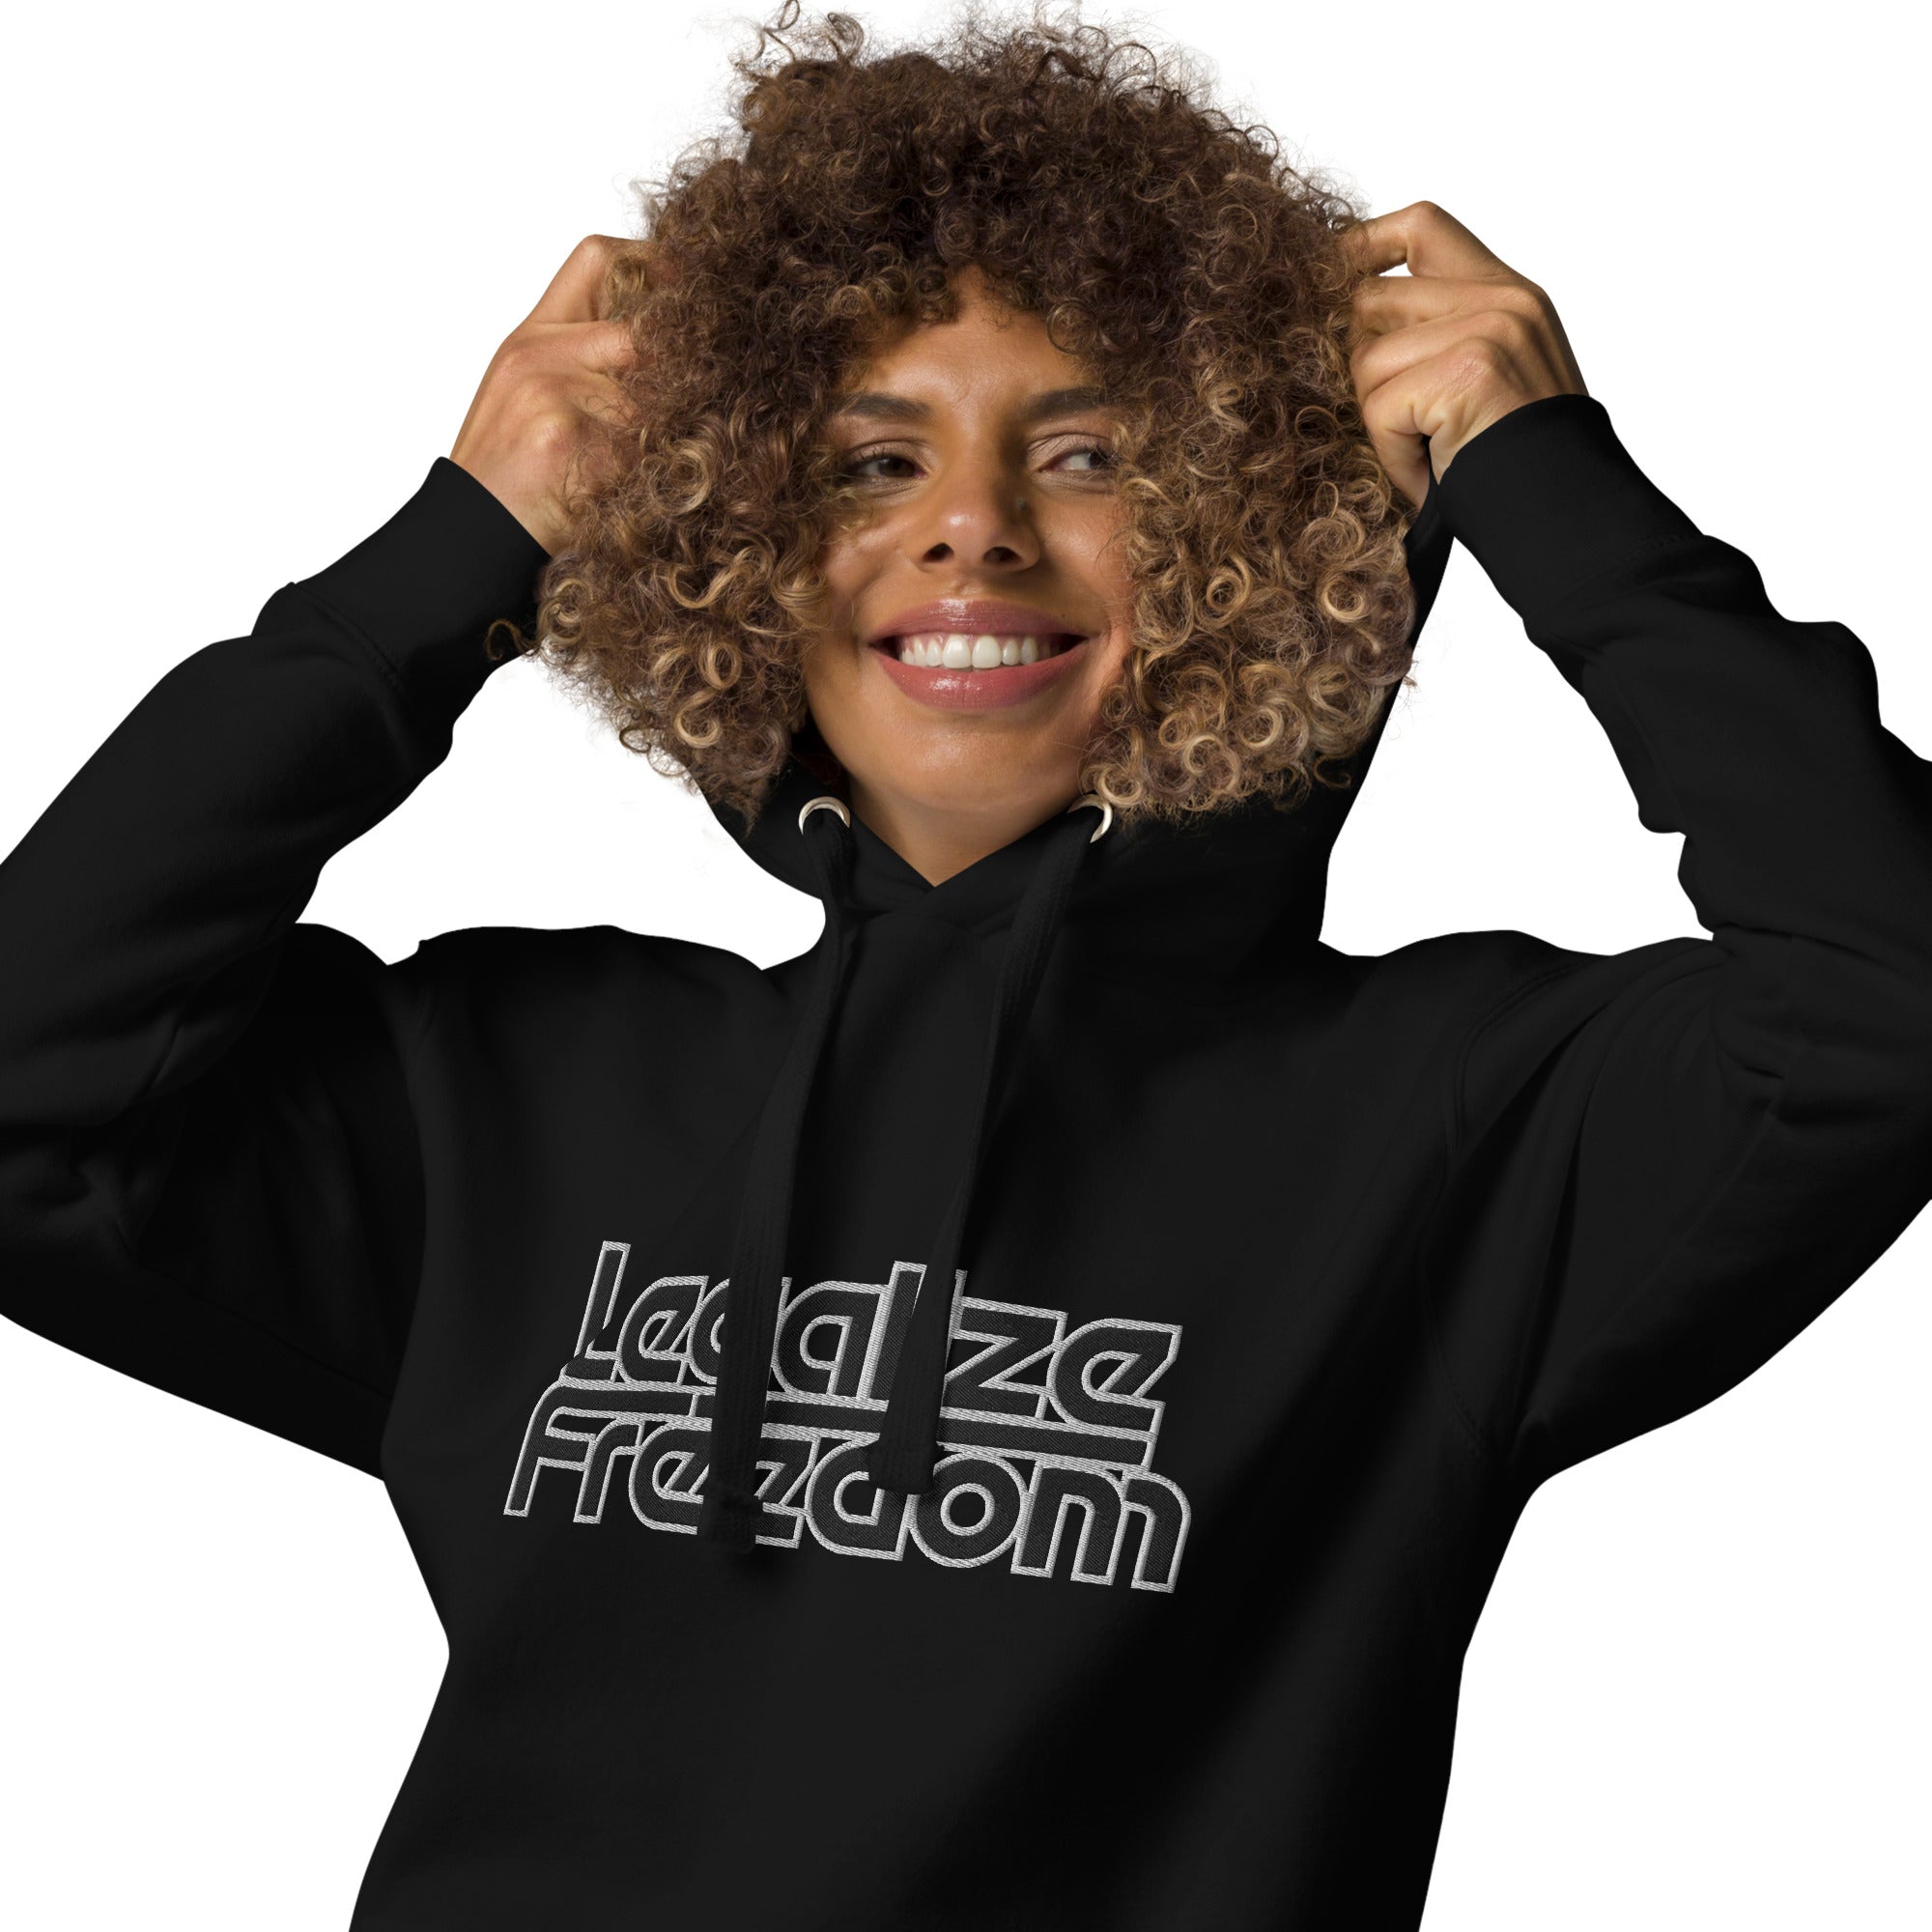 Legalize Freedom Embroidered Hoodie